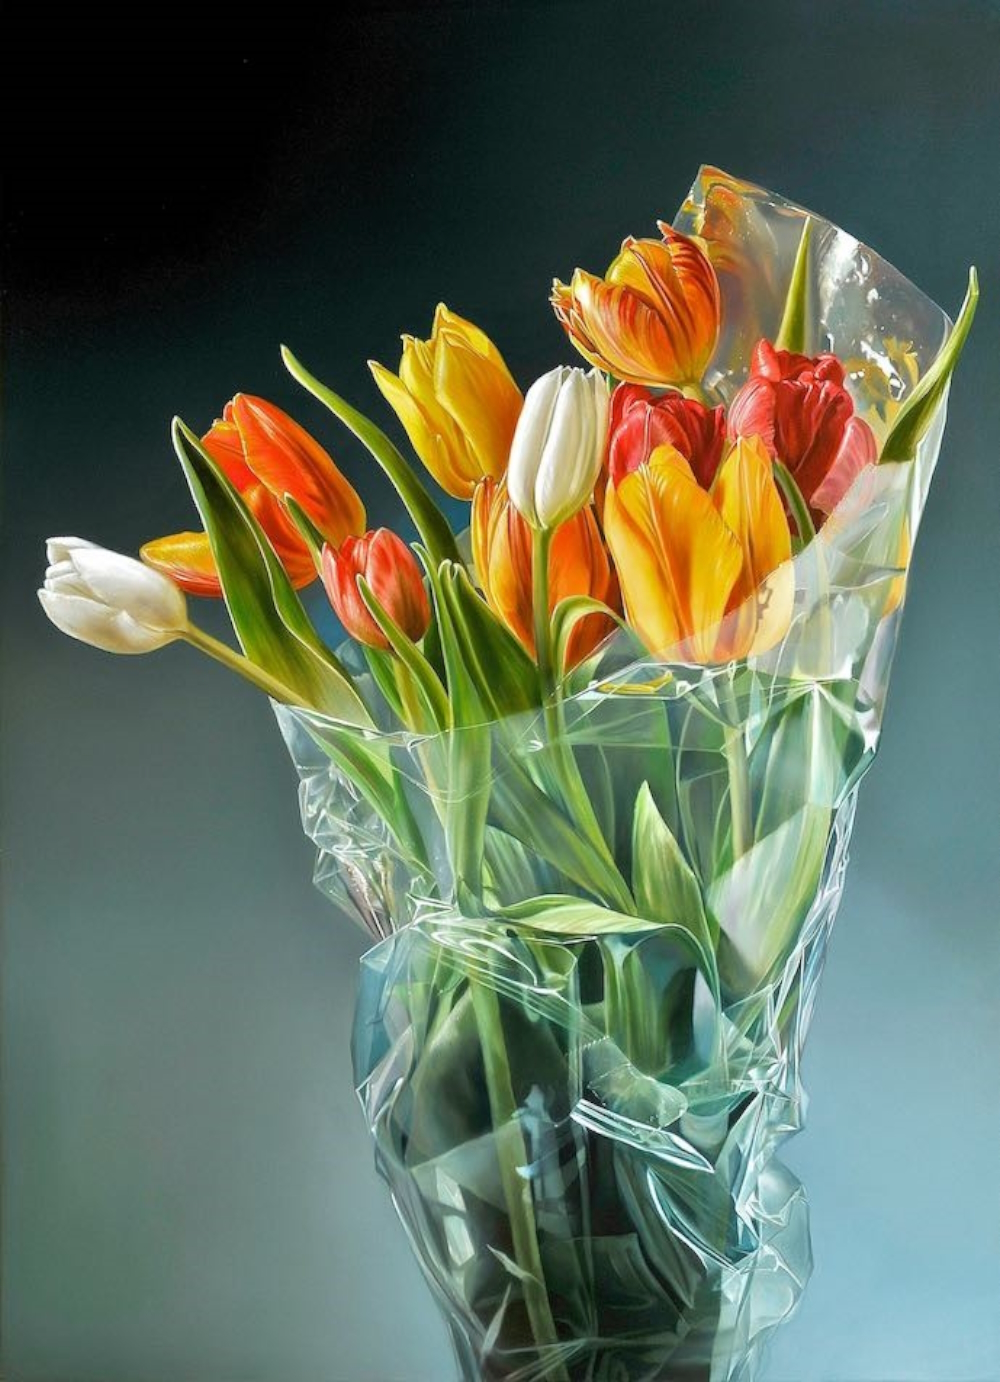 'Tulips in Plastic II' (2007), 100 x 80 cm, oil on canvas, private collection, The Netherlands.